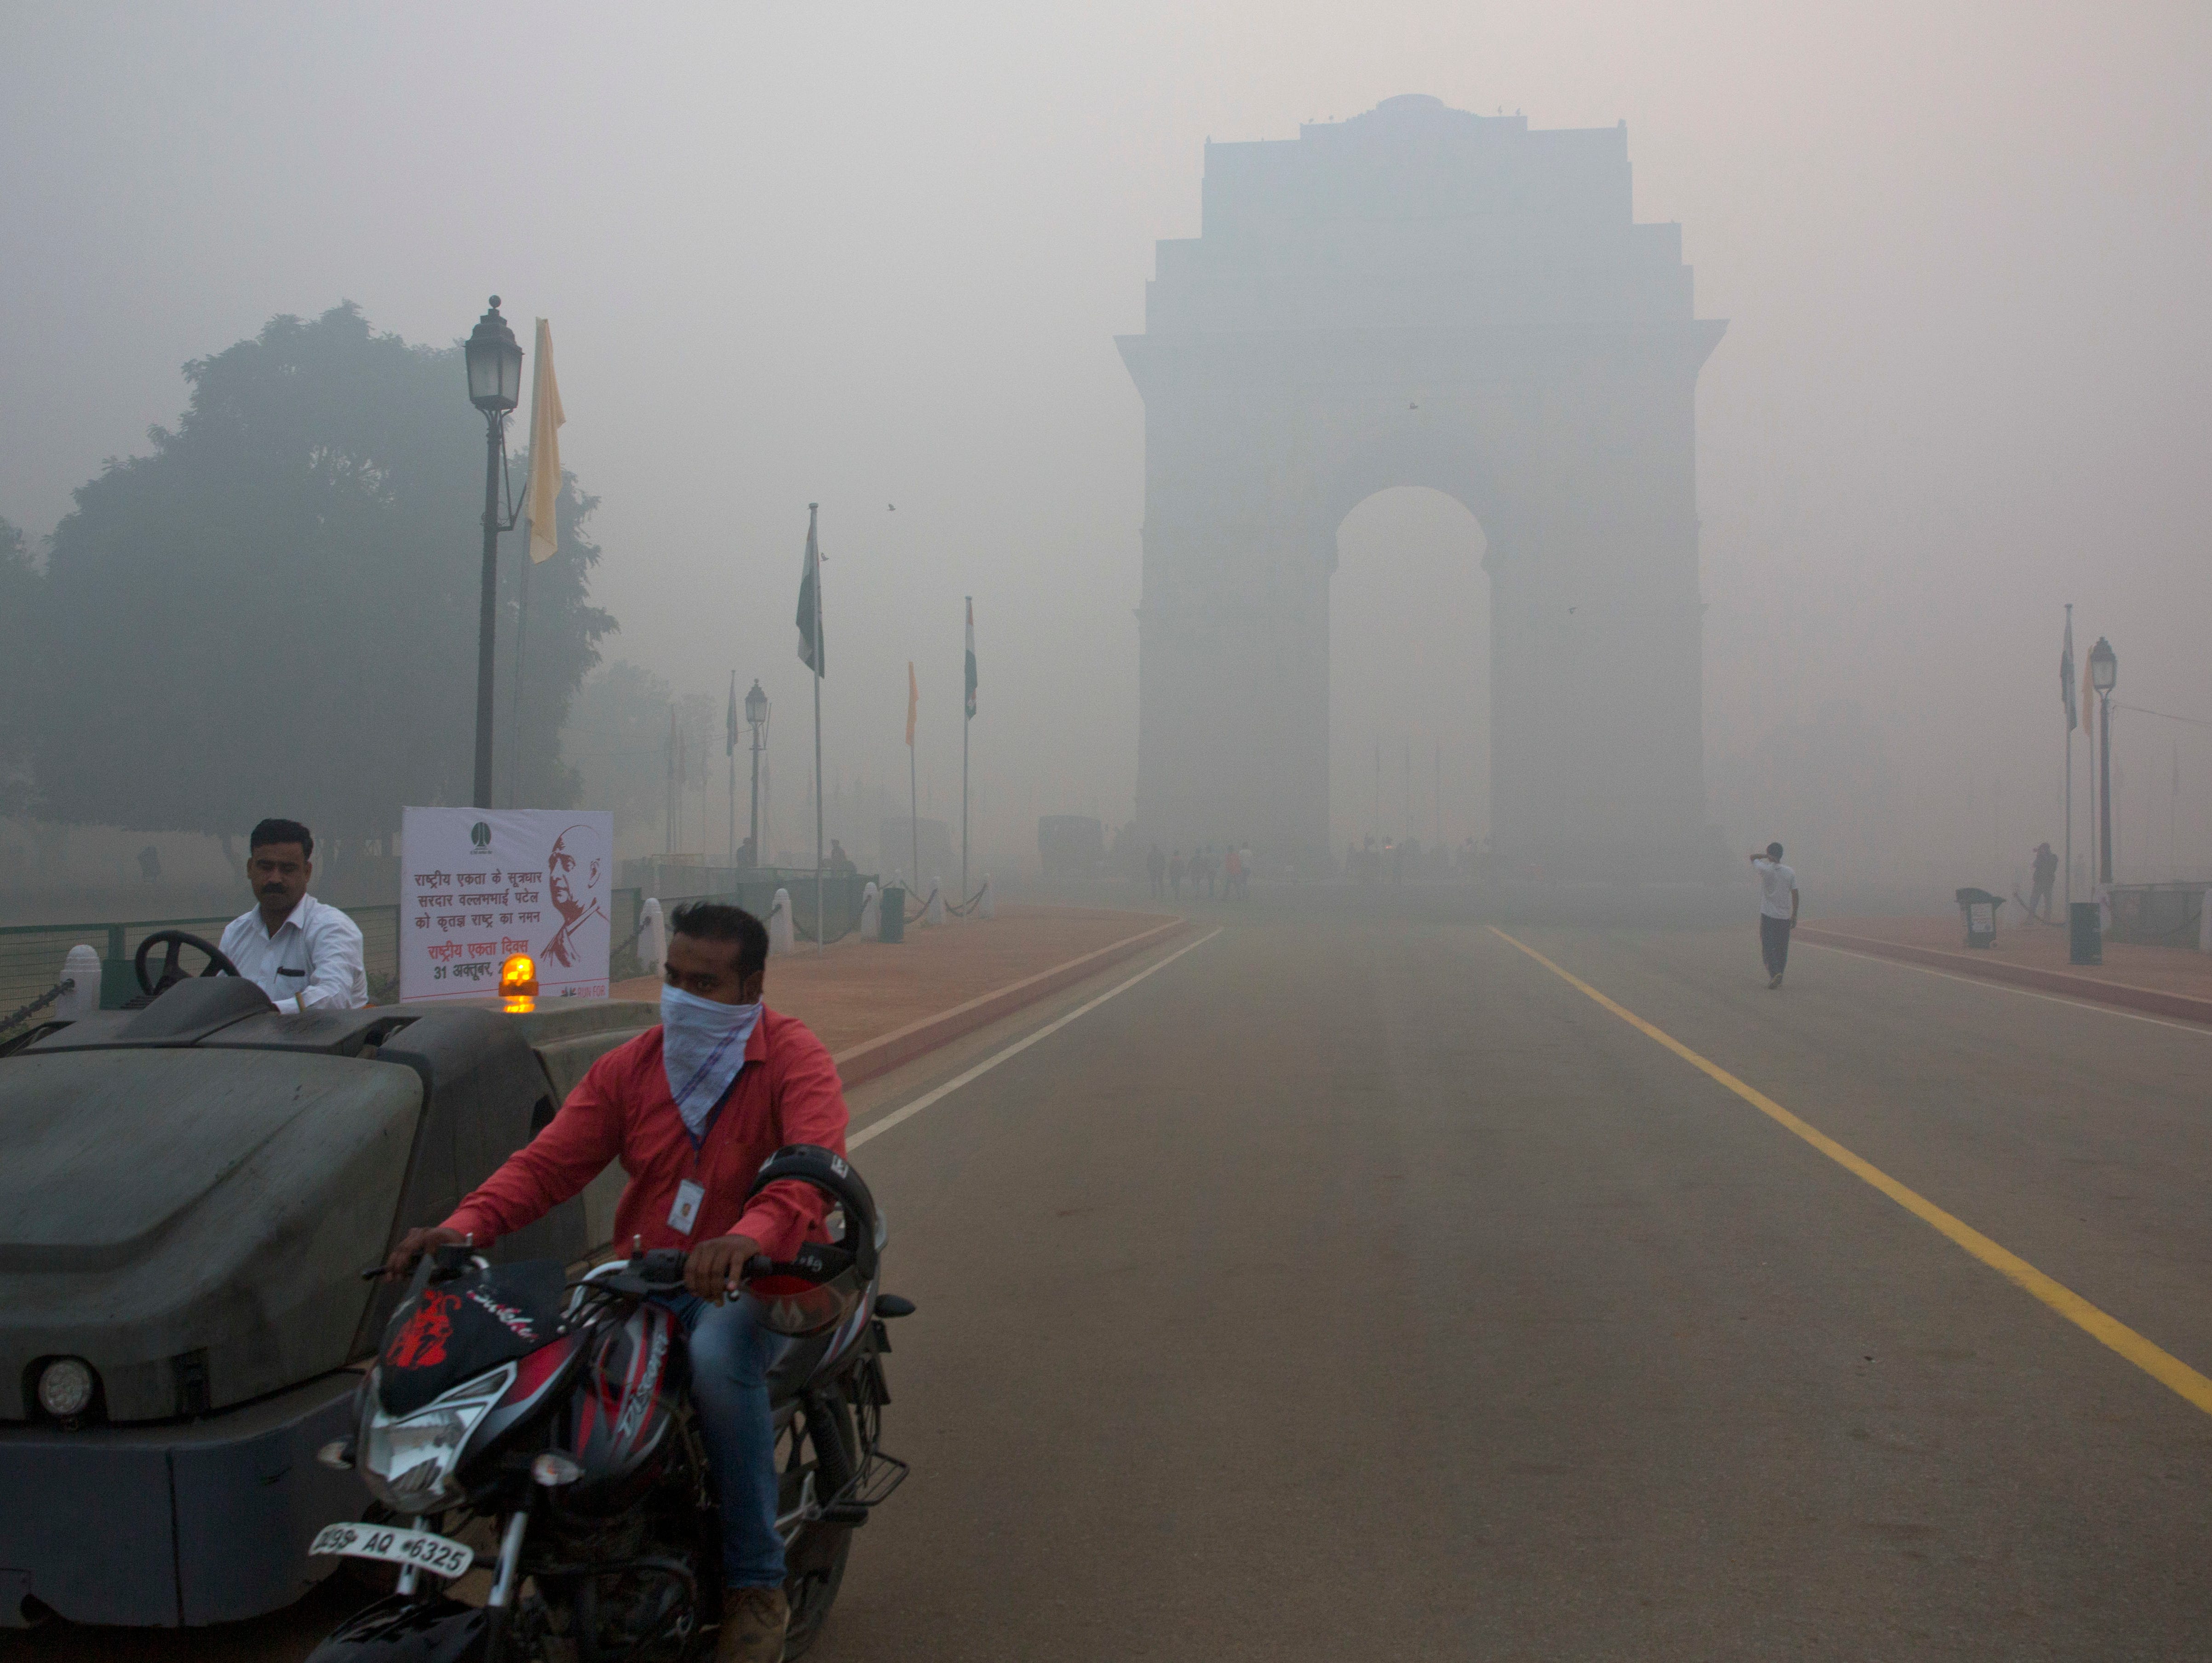 A man covers his face with a scarf as he rides in front of the landmark India Gate, enveloped by smoke and smog, on the morning following Diwali festival in New Delhi, India, Monday, Oct. 31, 2016.